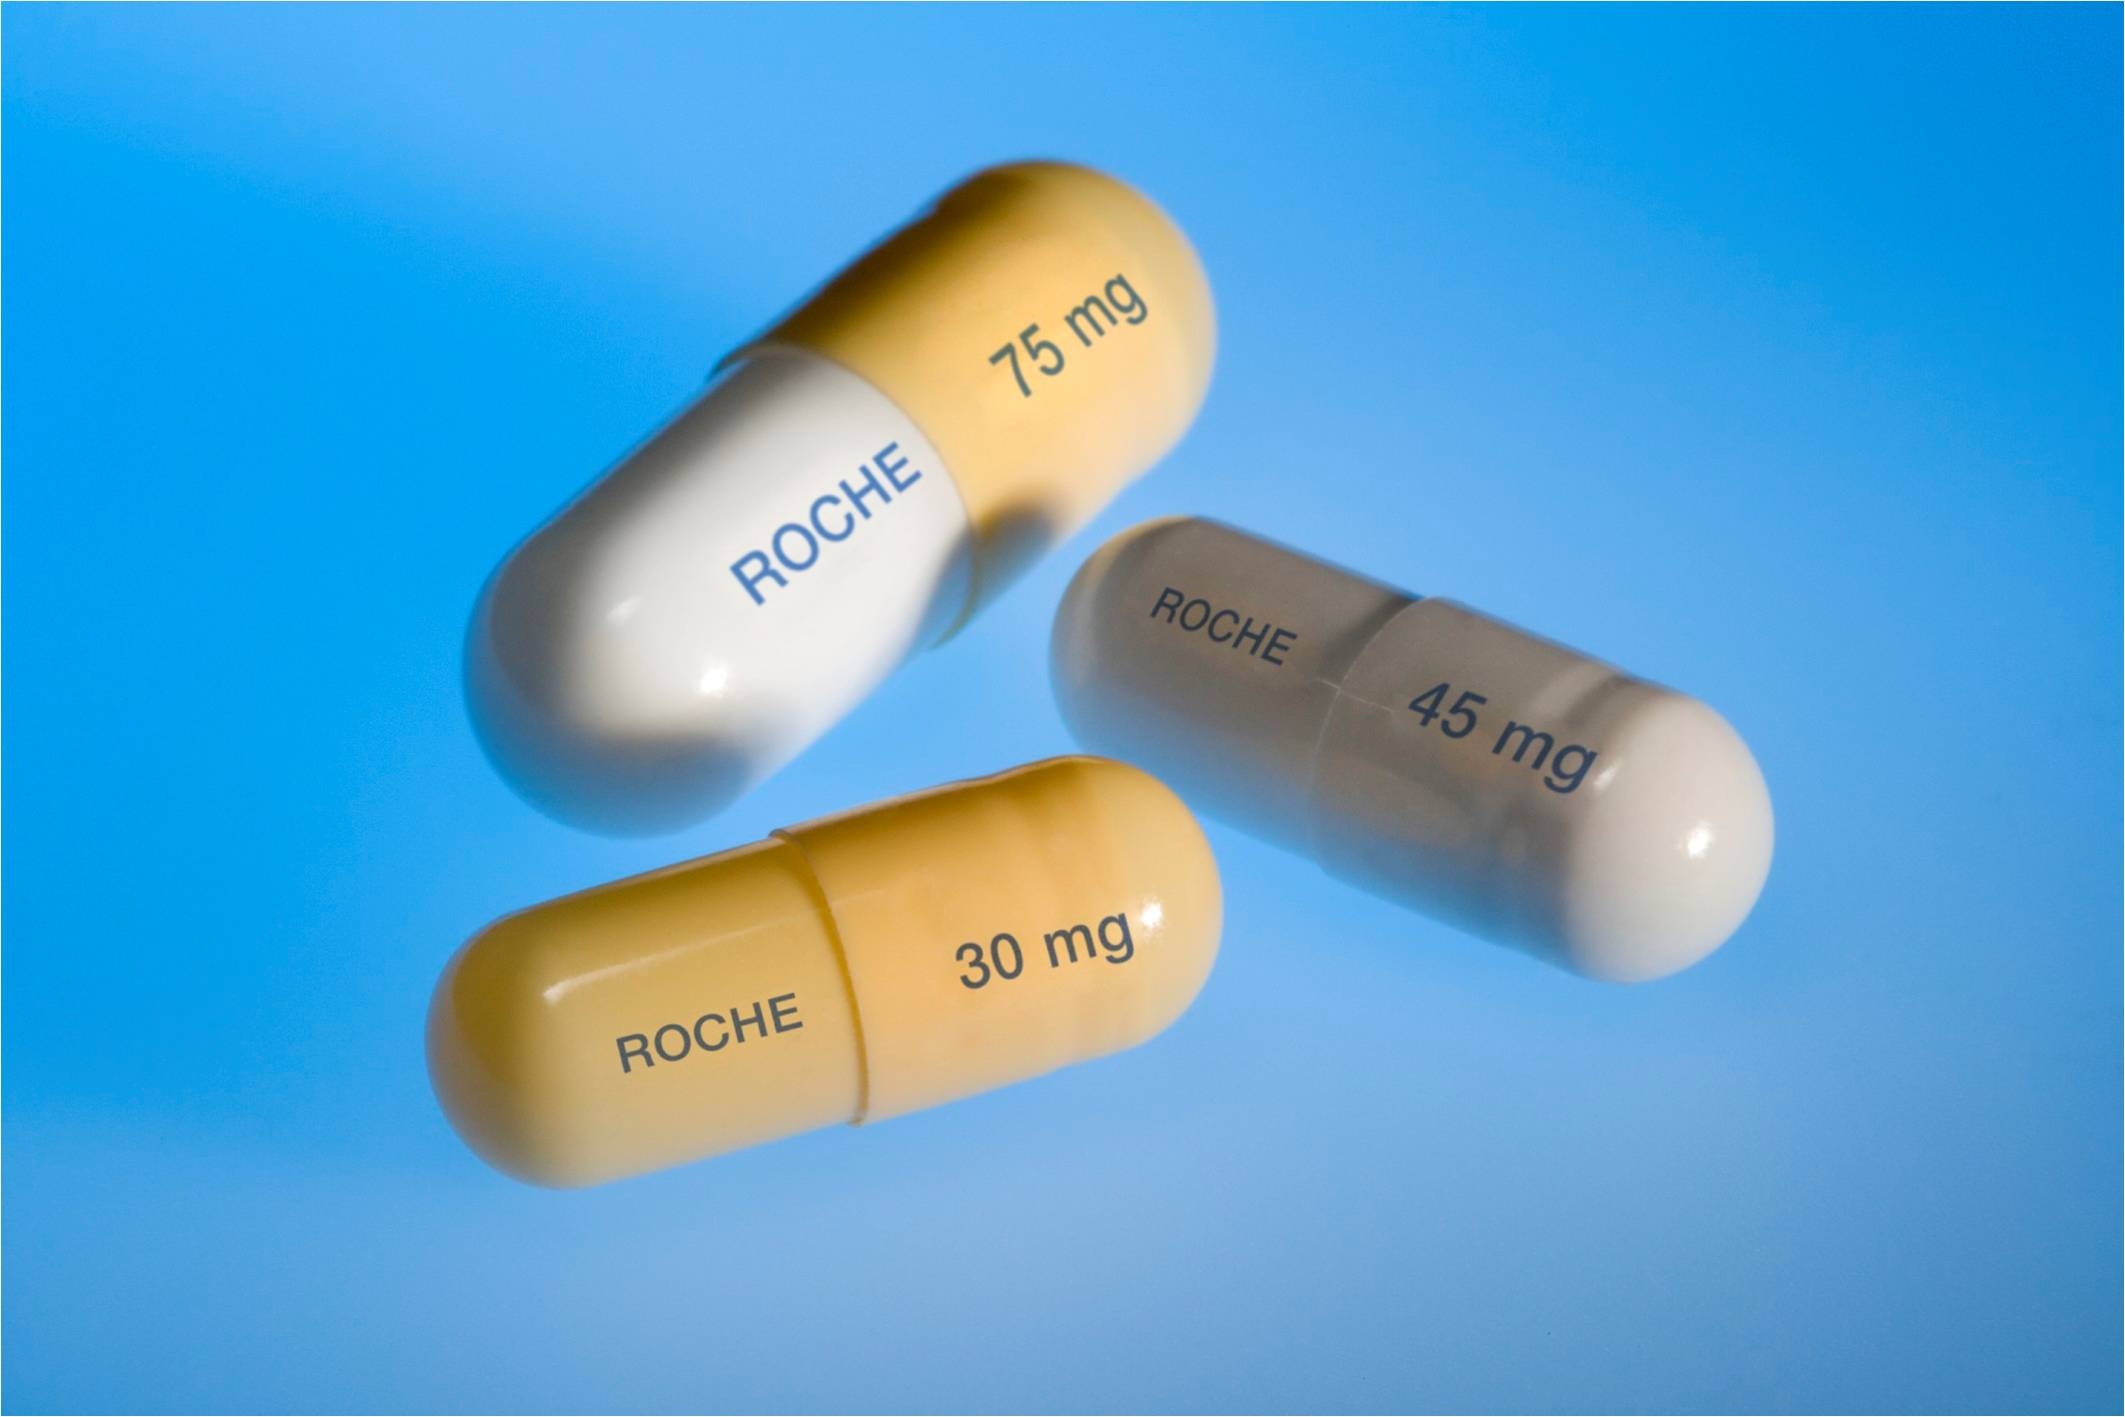 roche-announces-shipments-of-new-supplies-of-children-s-tamiflu-in-the